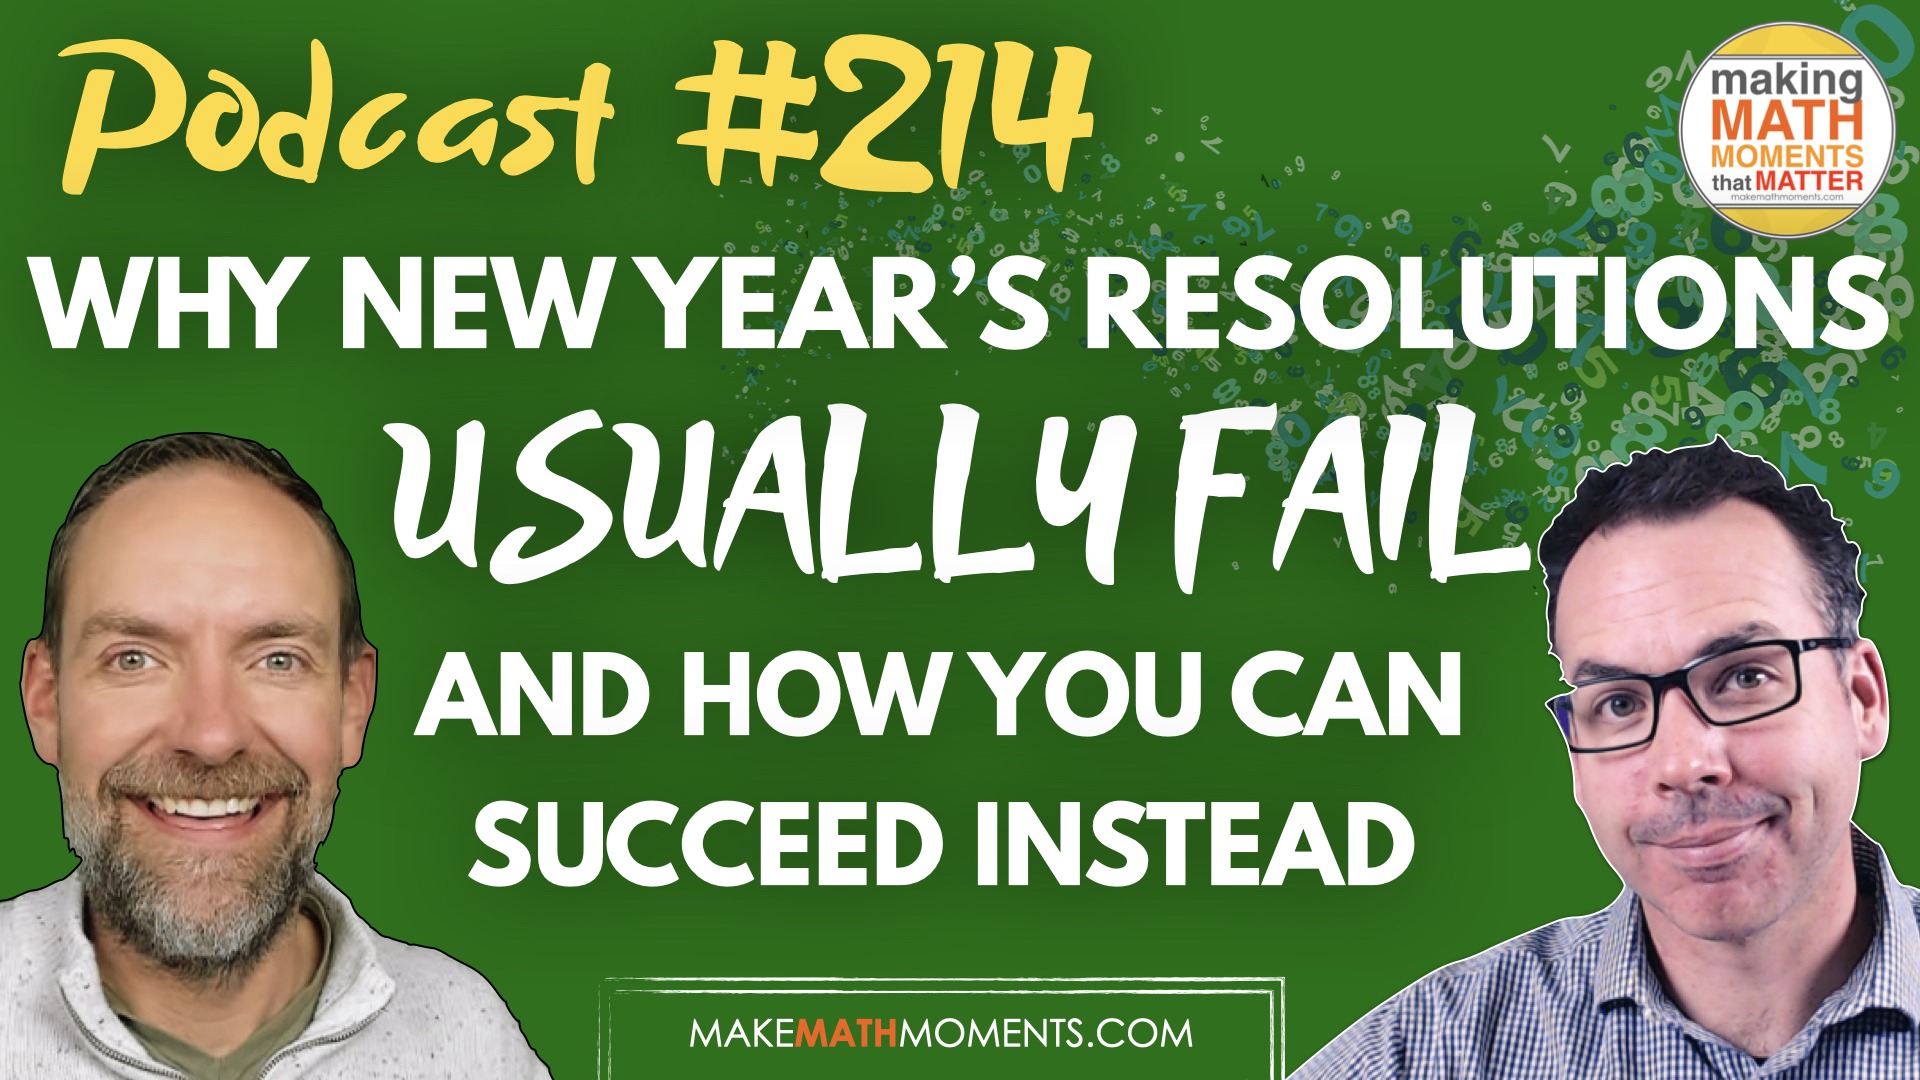 Episode 214: Why New Year’s Resolutions Usually Fail and How You Can Succeed Instead